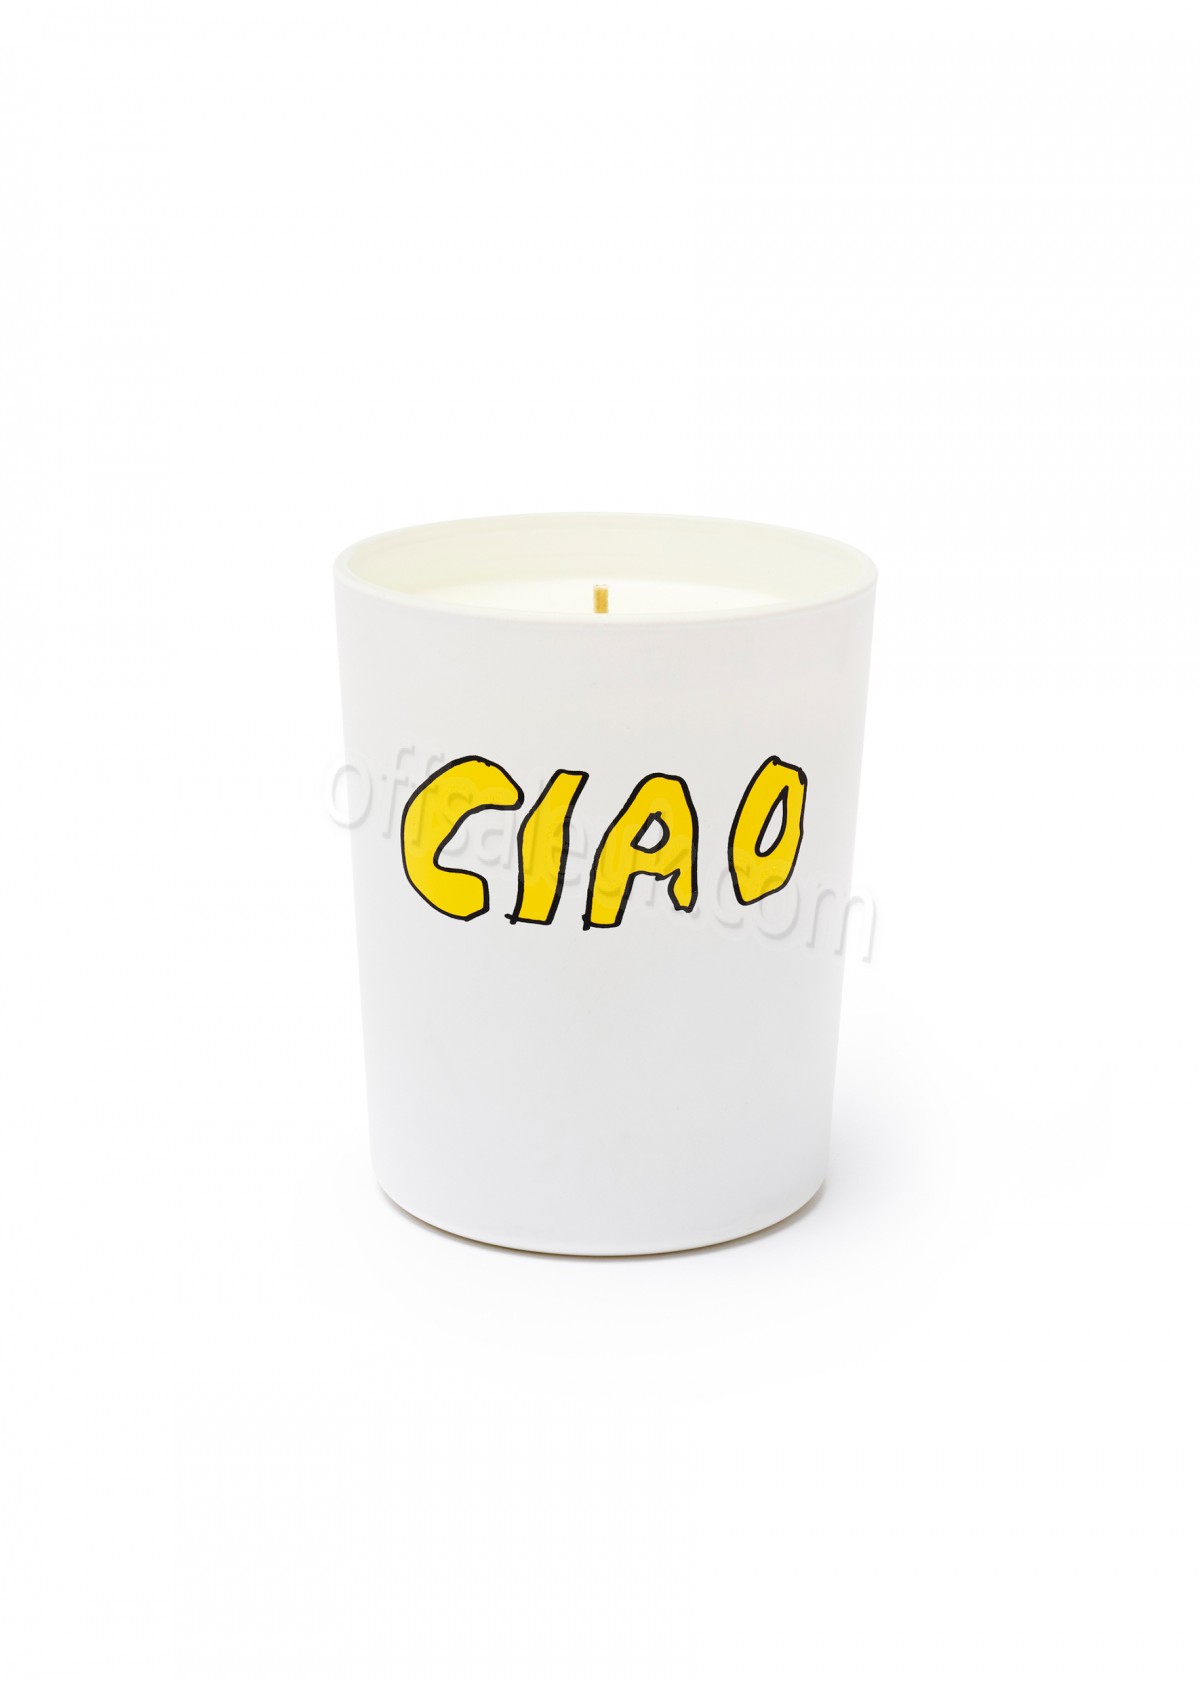 Cheap Ciao Candle - -0